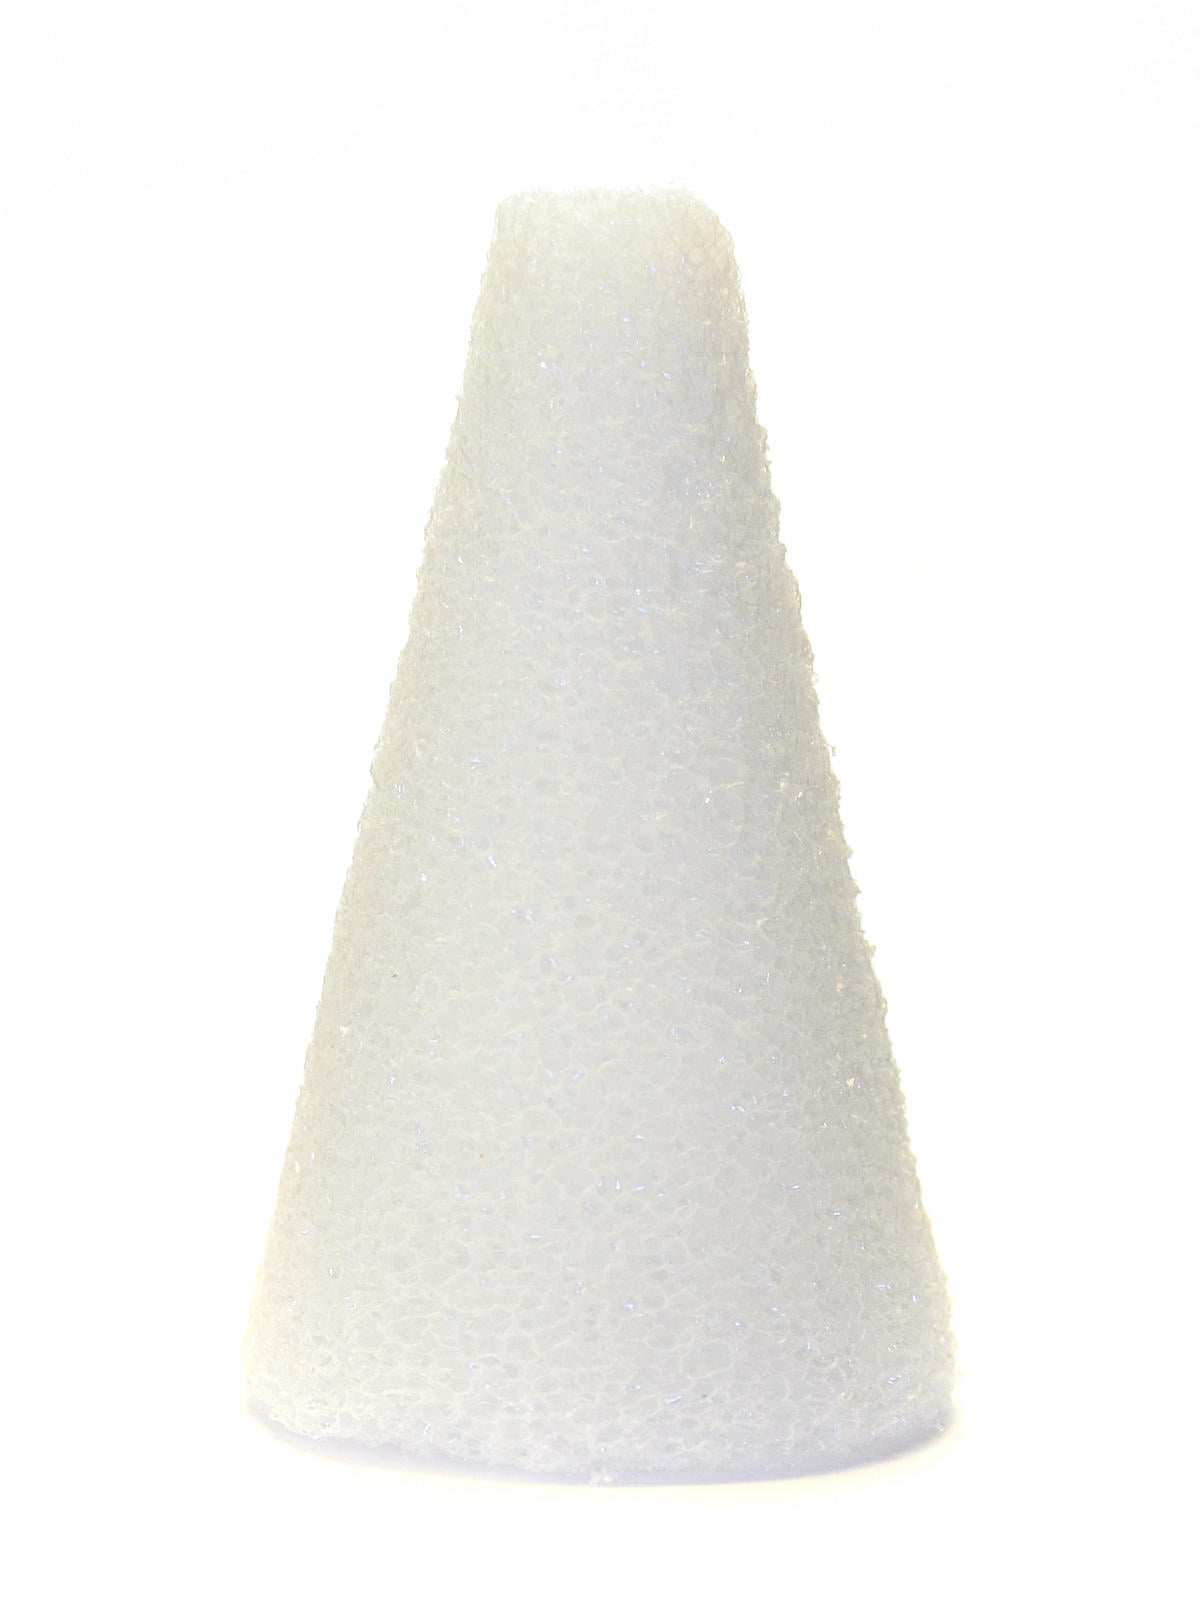 Styrofoam Cone 18in. 18in. Tall & 4in. Wide At Bottom